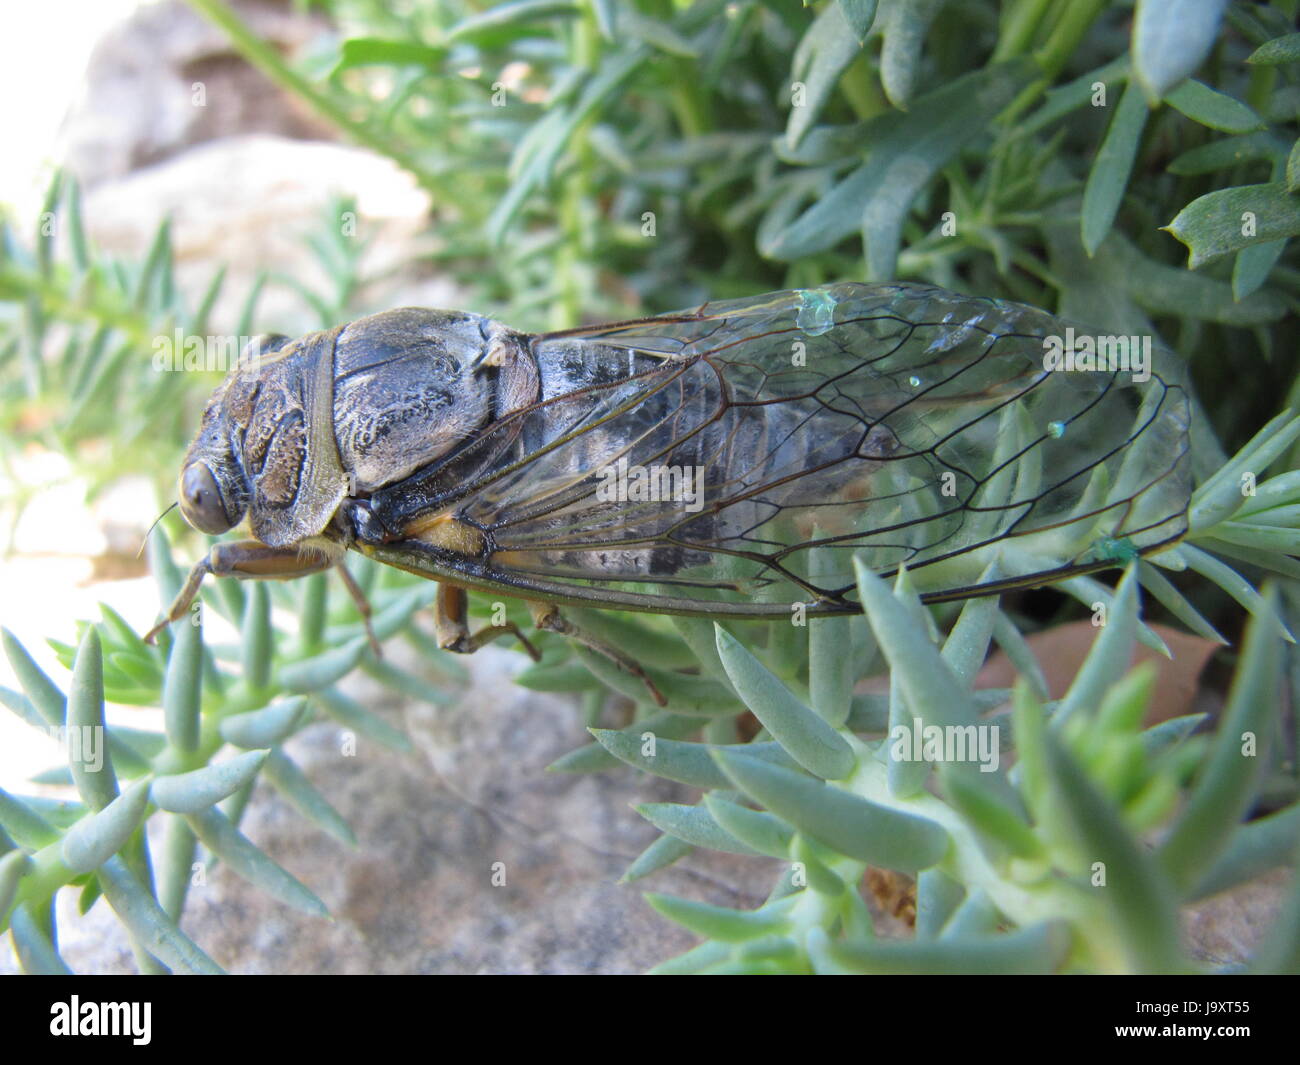 insect, summer, summerly, hot, france, loud, south, chant, life feeling, Stock Photo